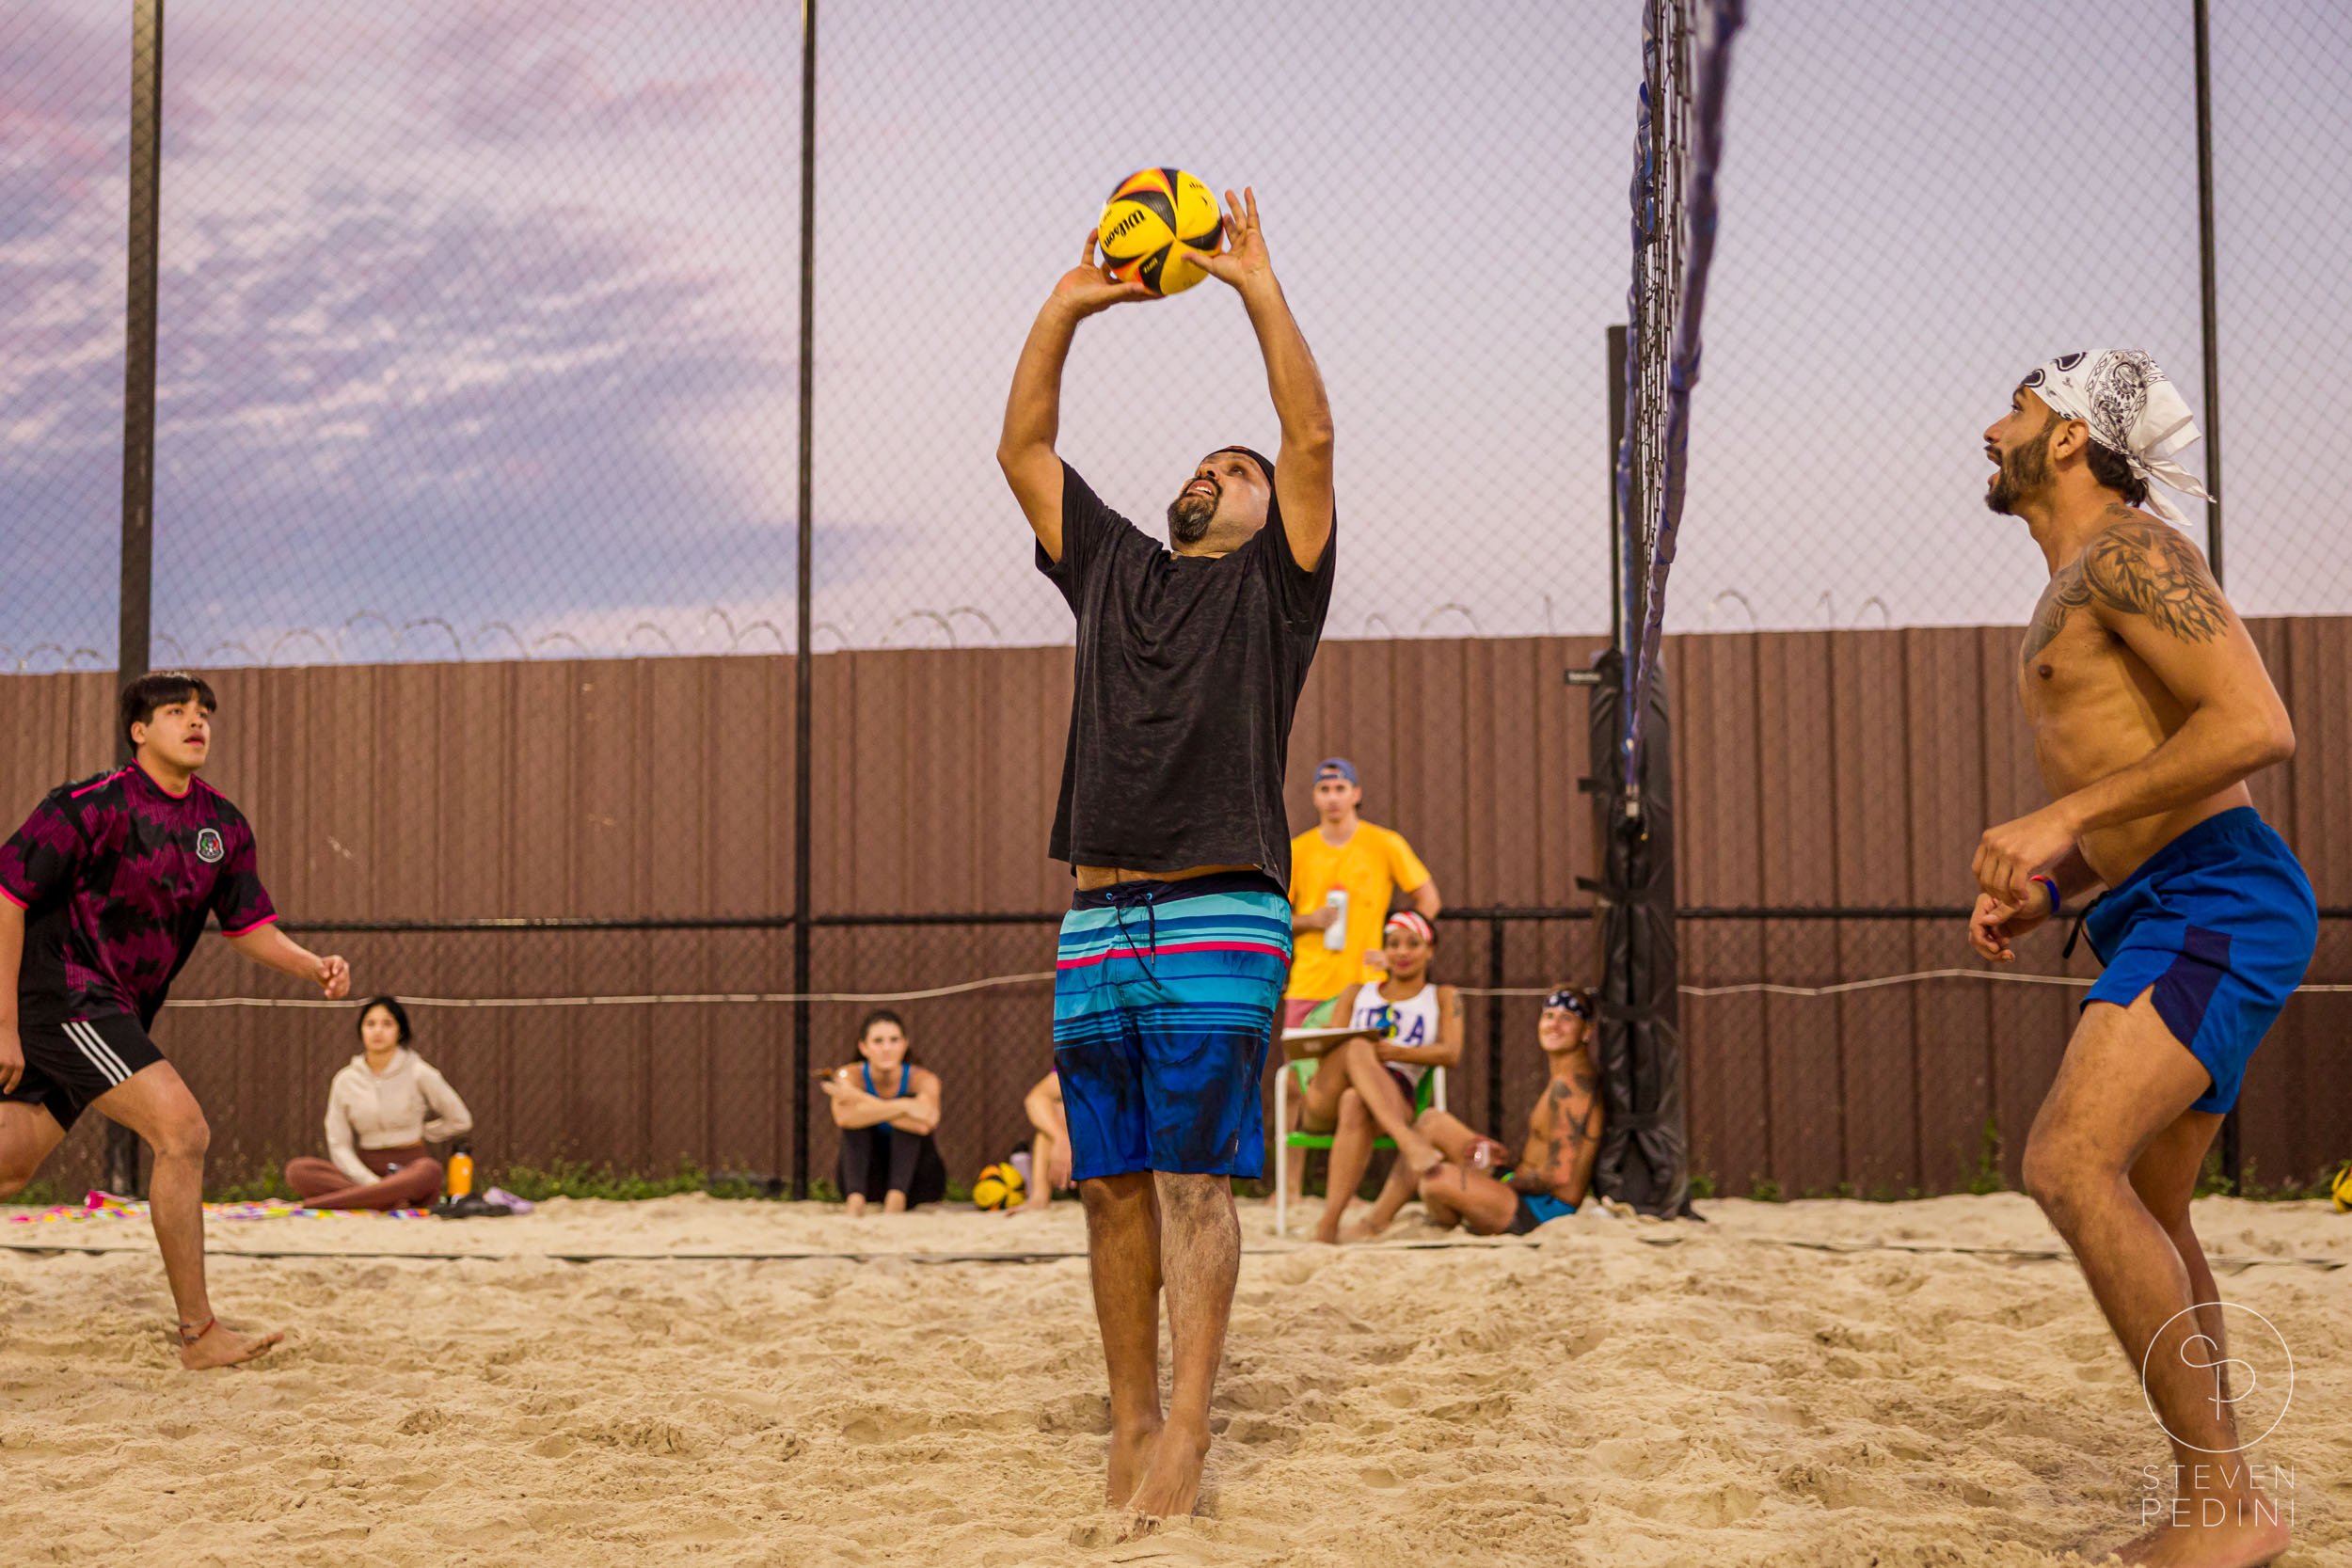 Steven Pedini Photography - Bumpy Pickle - Sand Volleyball - Houston TX - World Cup of Volleyball - 00268.jpg